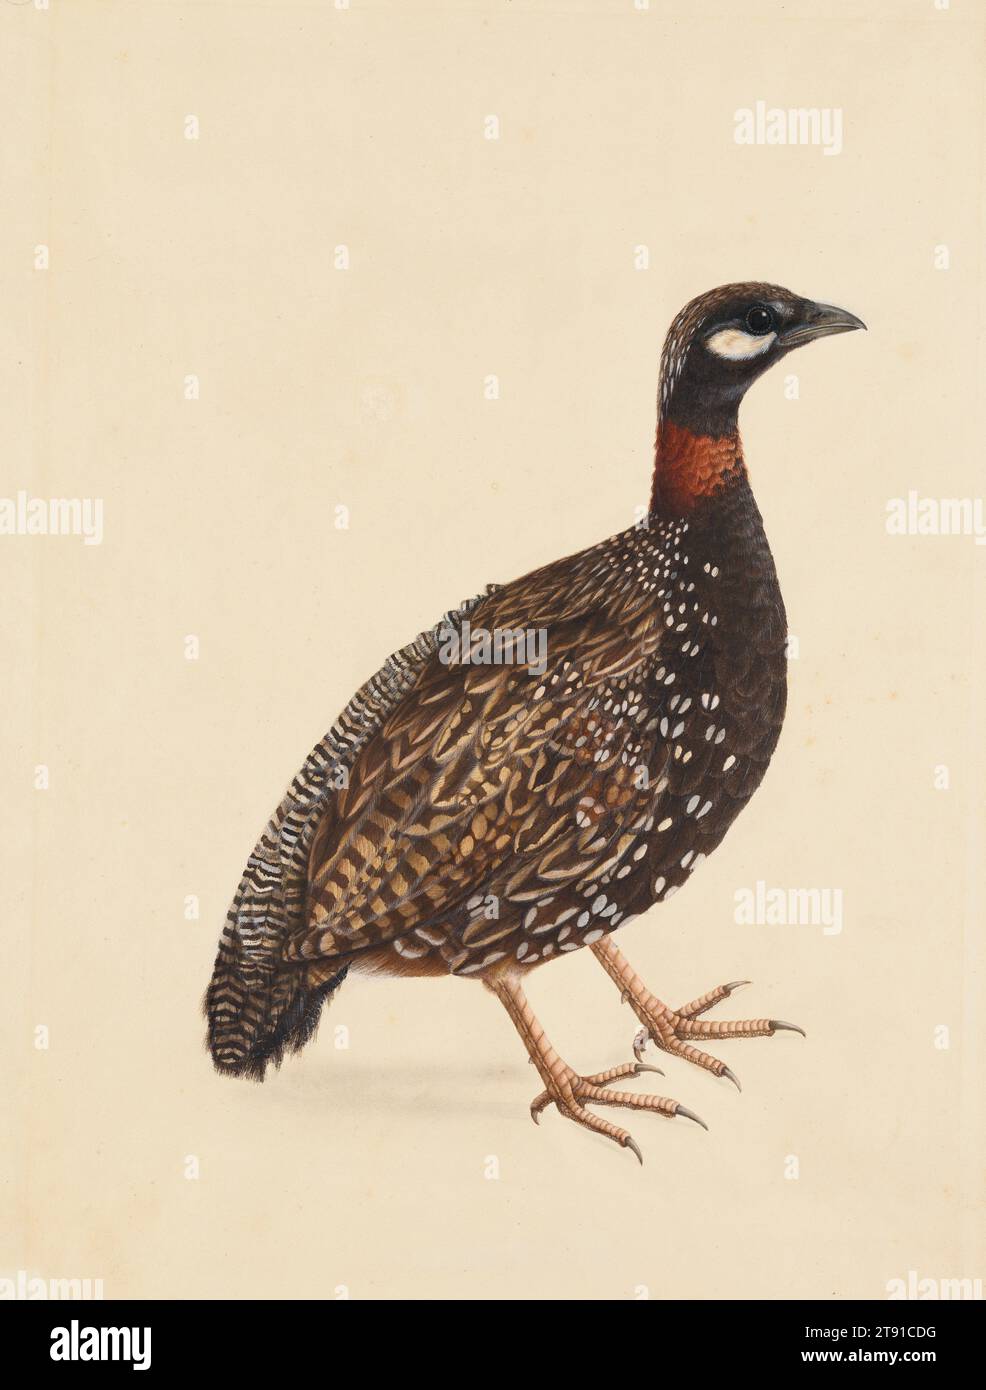 A Black Partridge, c. 1800, Company School, 14 3/4 x 11 3/8 in. (37.47 x 28.89 cm) (outer frame), Opaque watercolor on paper, India, 18th-19th century, 'Company school' refers to a style of Indian painting that developed during the last quarter of the eighteenth century. With the decline of Mughal nobility at that time, Indian artists naturally turned to their British rulers for patronage. This attempt on the part of artists to work in a mixed Indo-European style that would appeal to resident Europeans employed by the various East India trade companies gave rise to the name 'company school Stock Photo